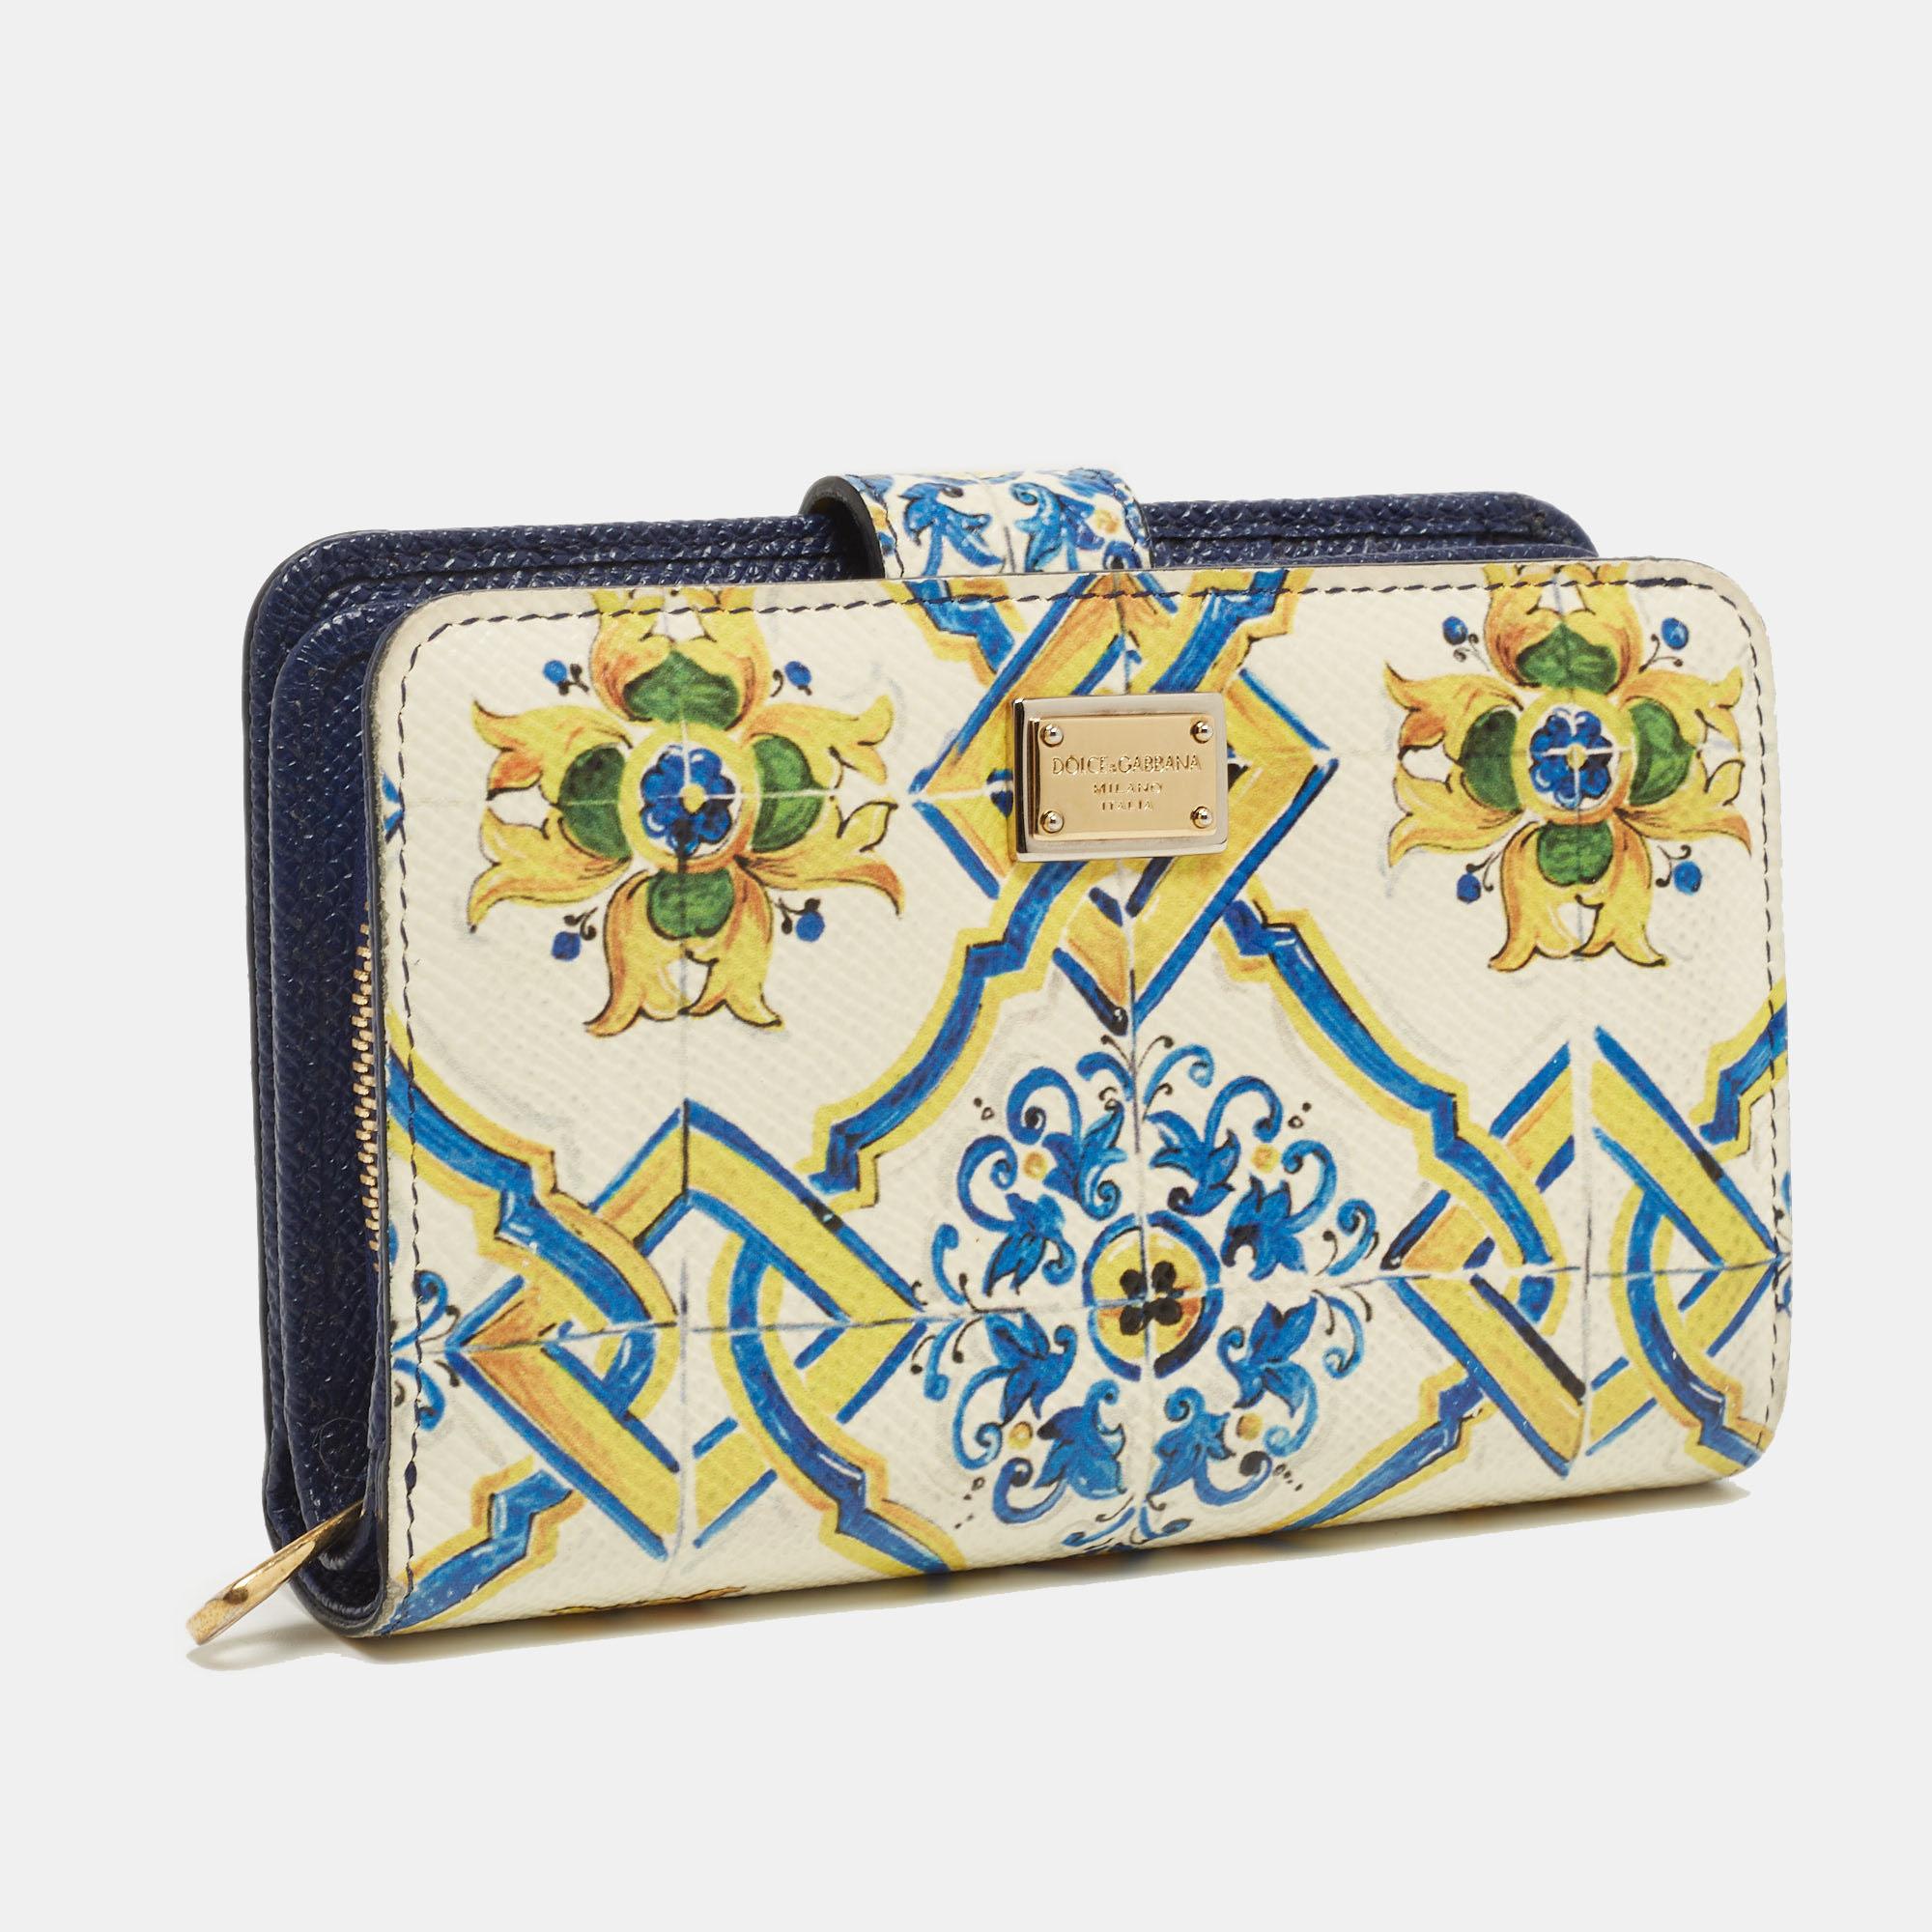 From the house of Dolce & Gabbana comes this fabulous French wallet that is functional and stylish. It is made from white leather accented with a multicolored Majolica print all over and lined with leather on the insides. The wallet comes with two